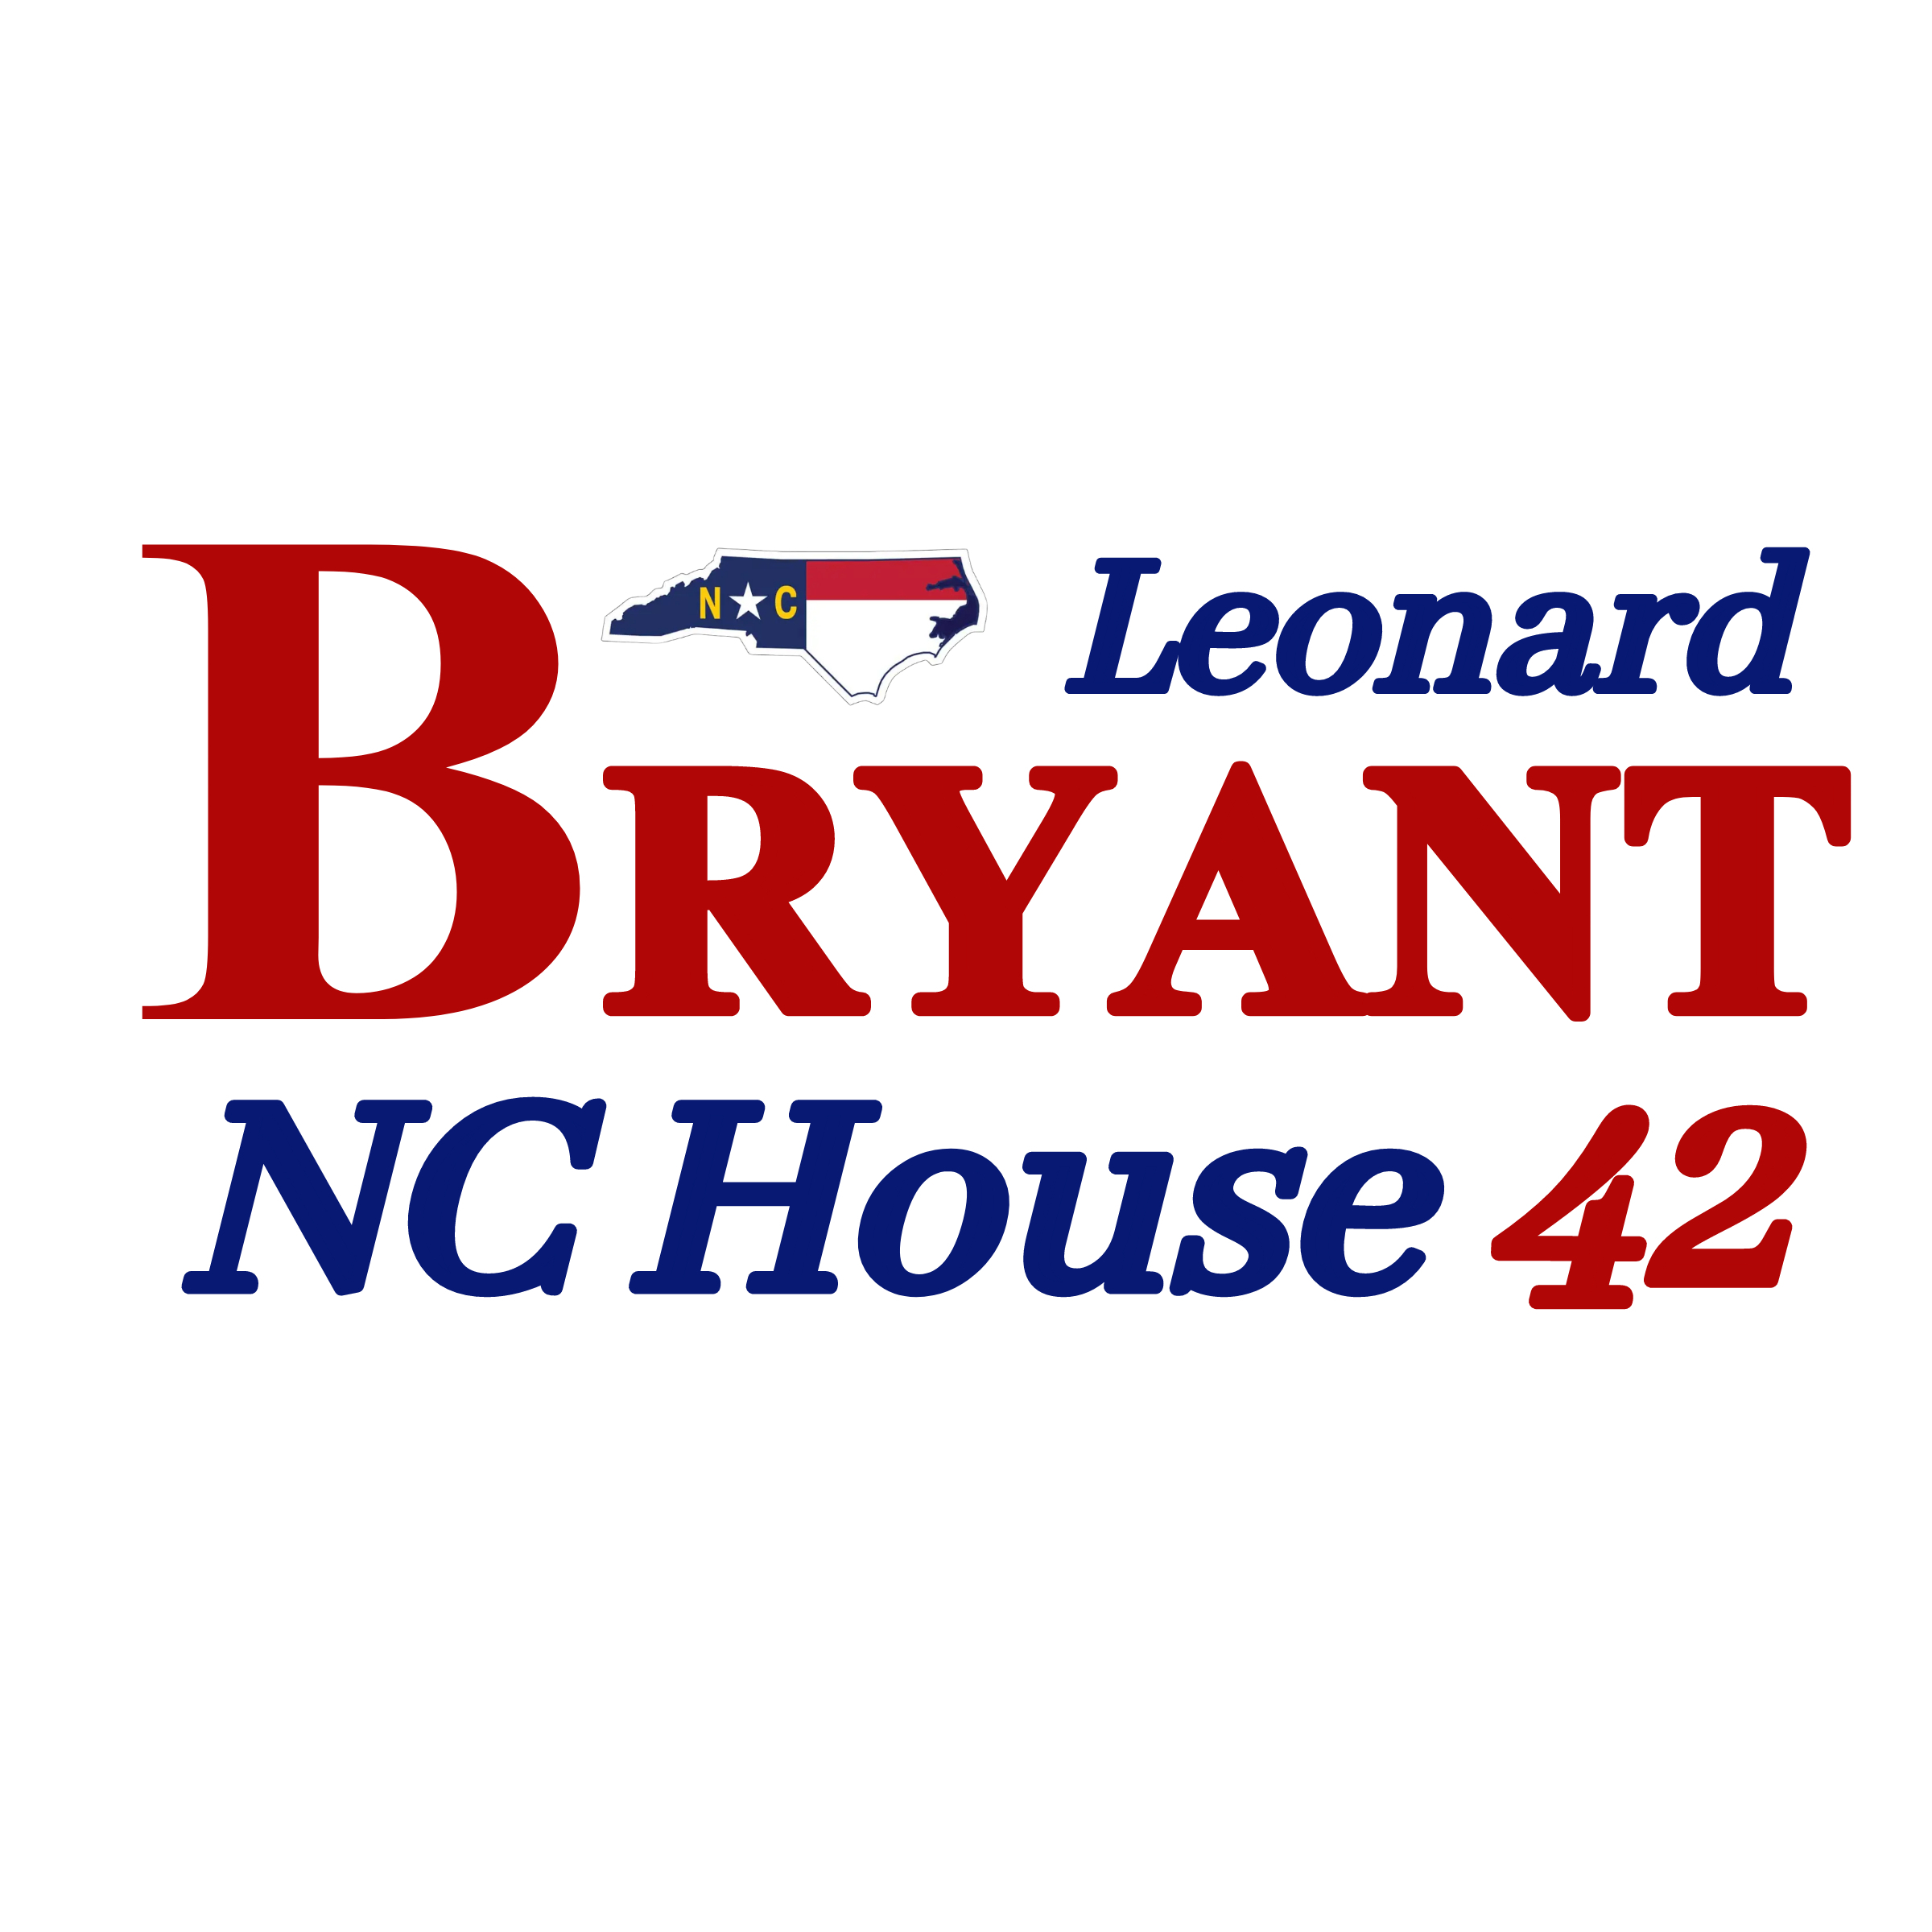 Bryant for NC House 42